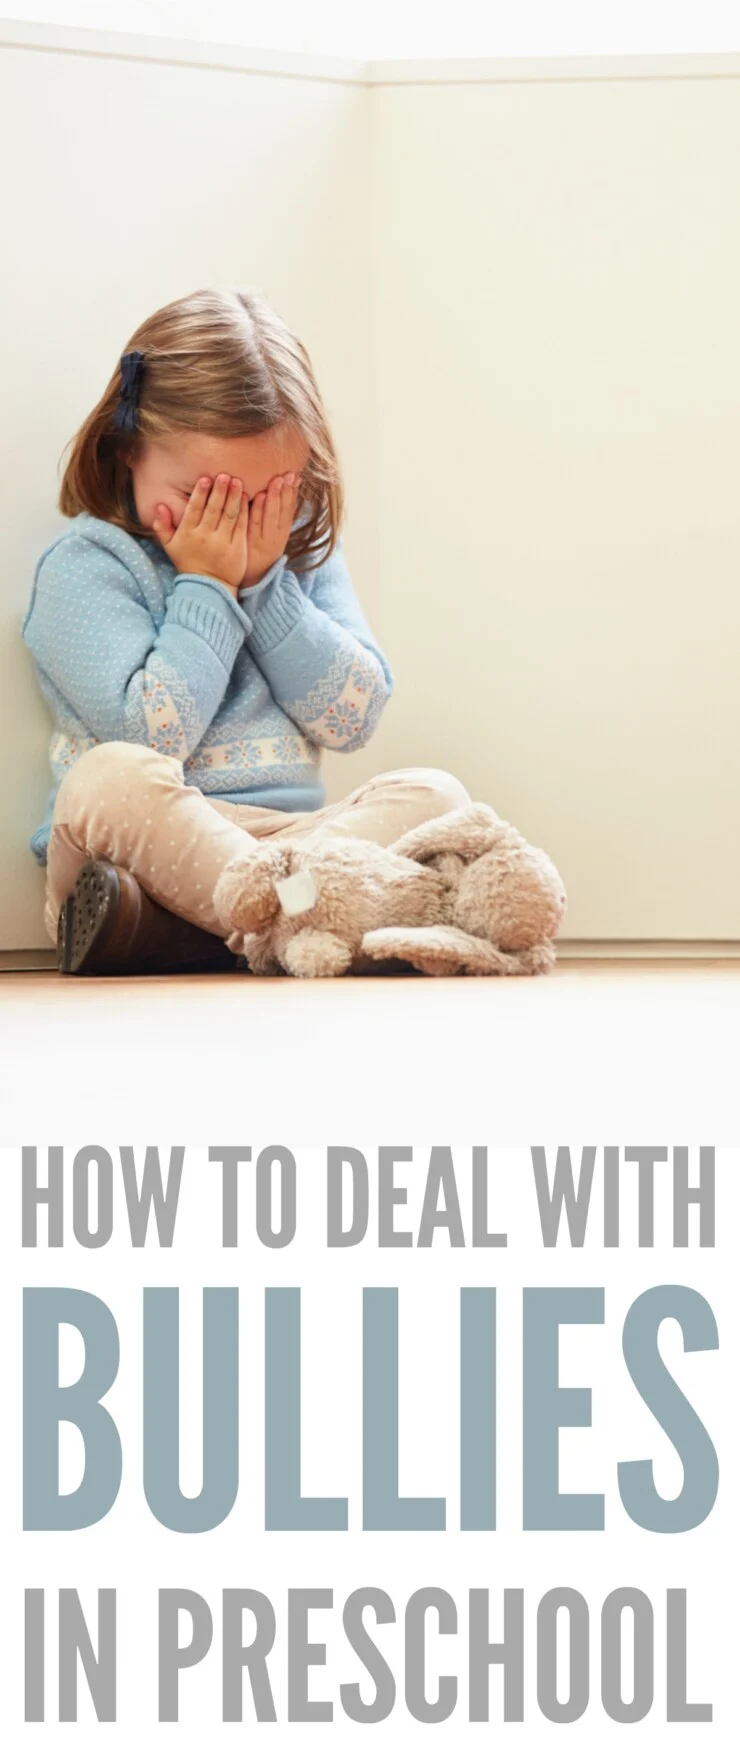 Helpful tips and ideas for how to deal with bullies in Preschool. Give your child the skills and understanding they need to deal with a bully.